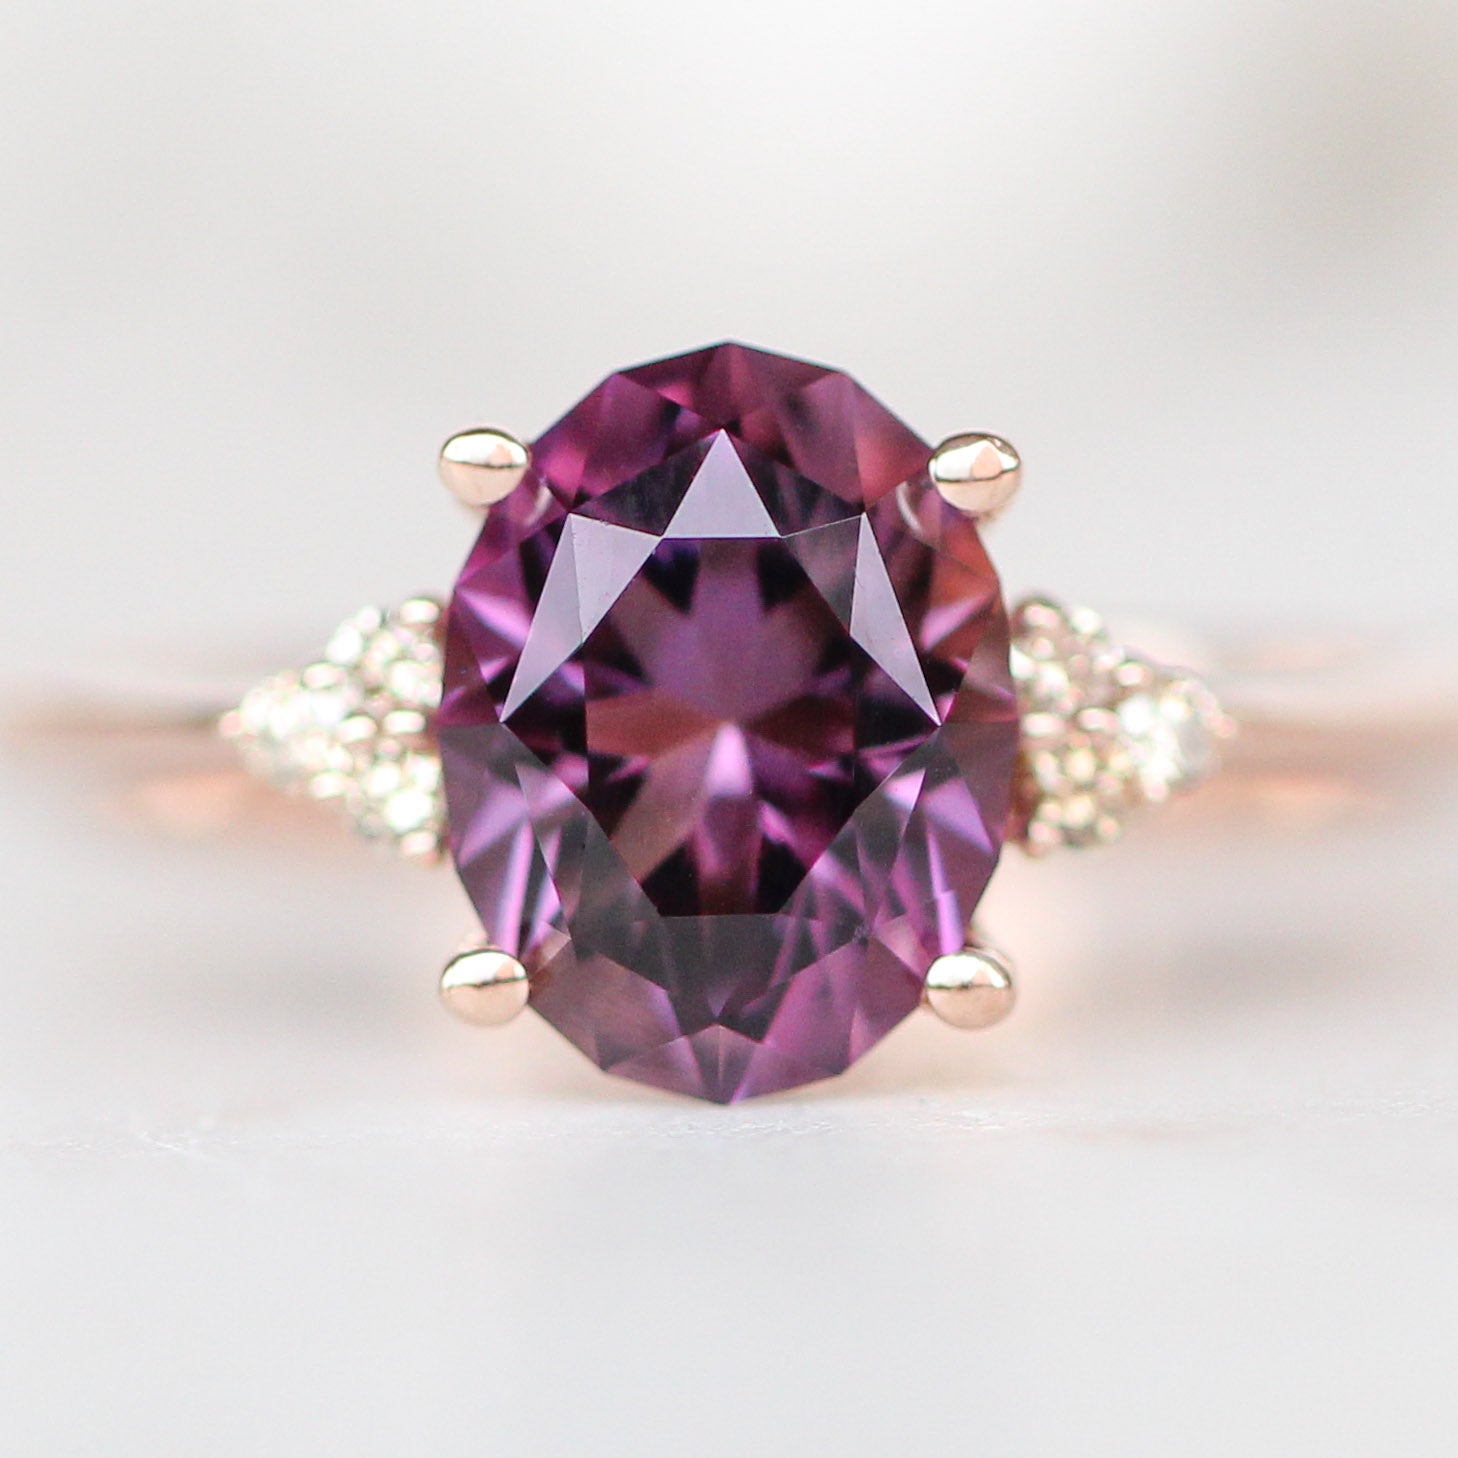 Imogene Ring with 2.31 Carat Amethyst and White Accent Diamonds in 14k Rose Gold - Ready to Size and Ship - Midwinter Co. Alternative Bridal Rings and Modern Fine Jewelry